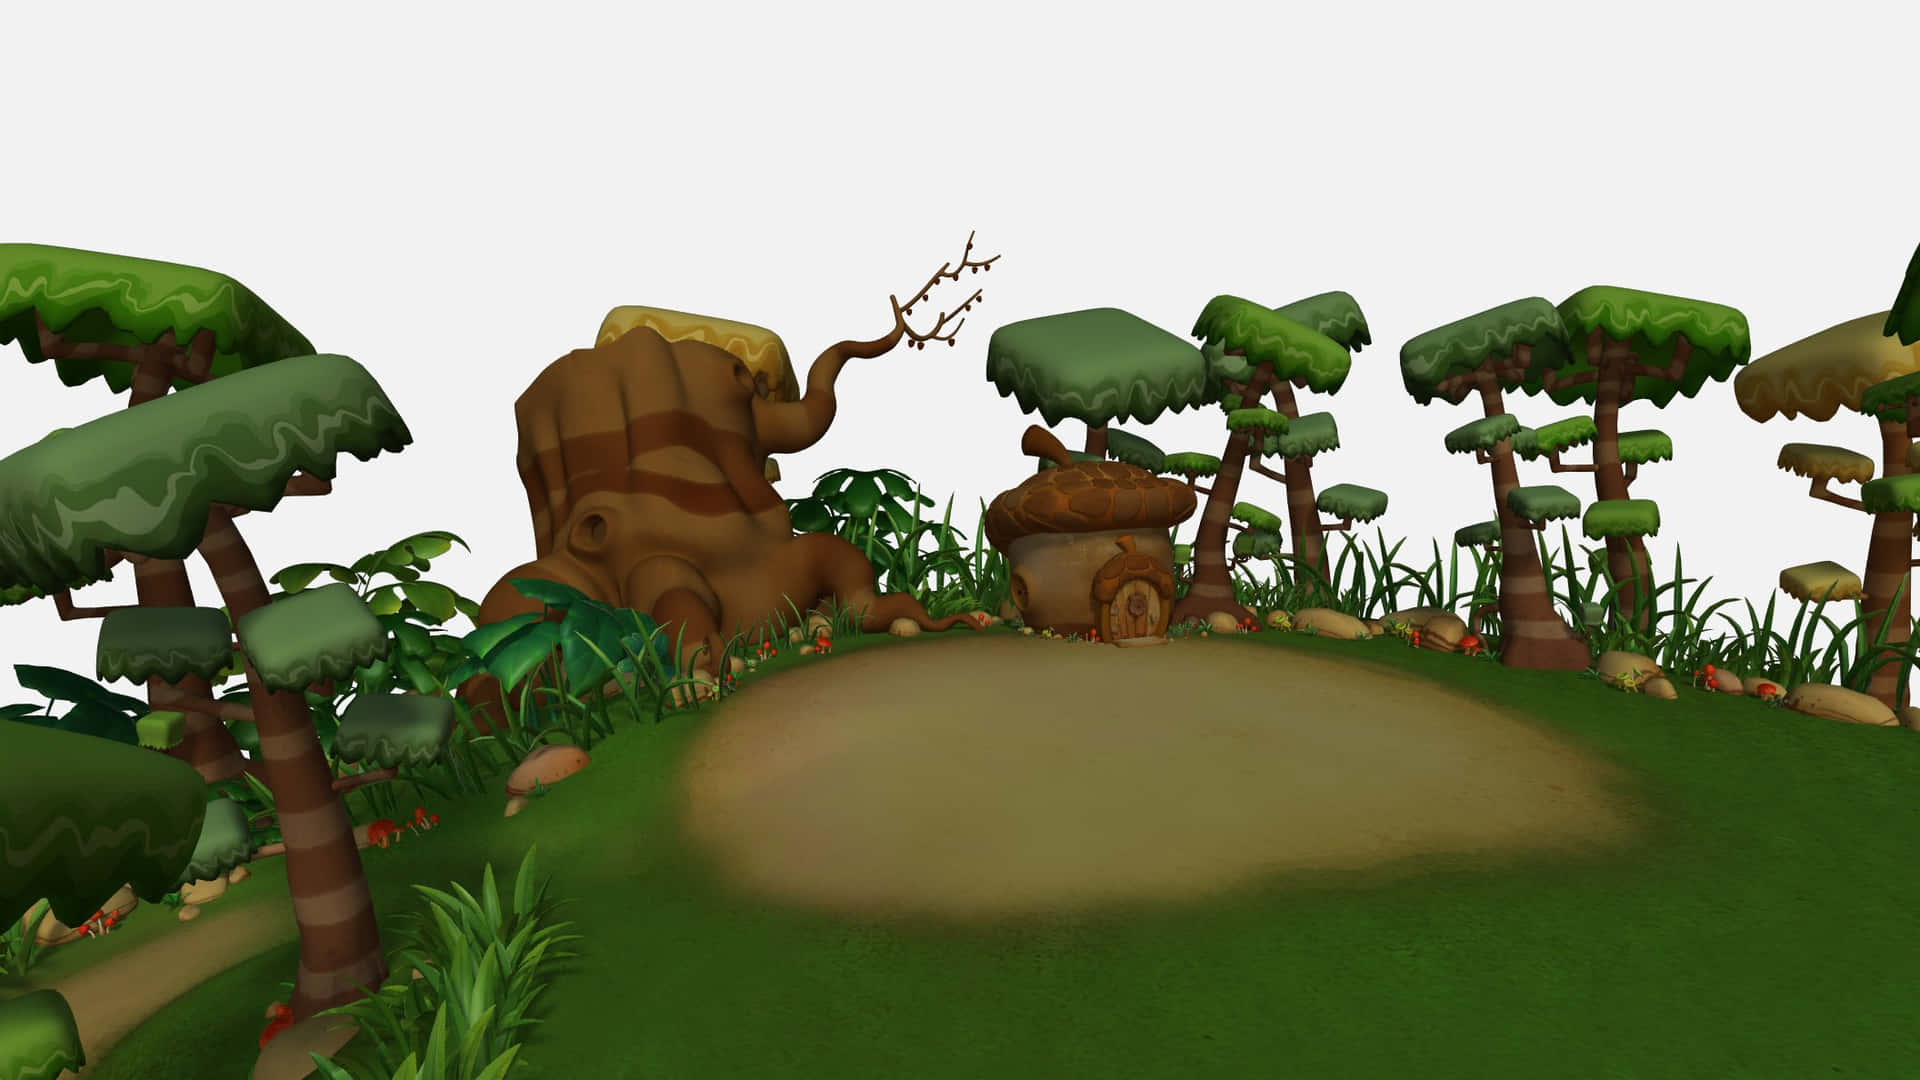 Take a stroll in the secluded Cartoon Forest